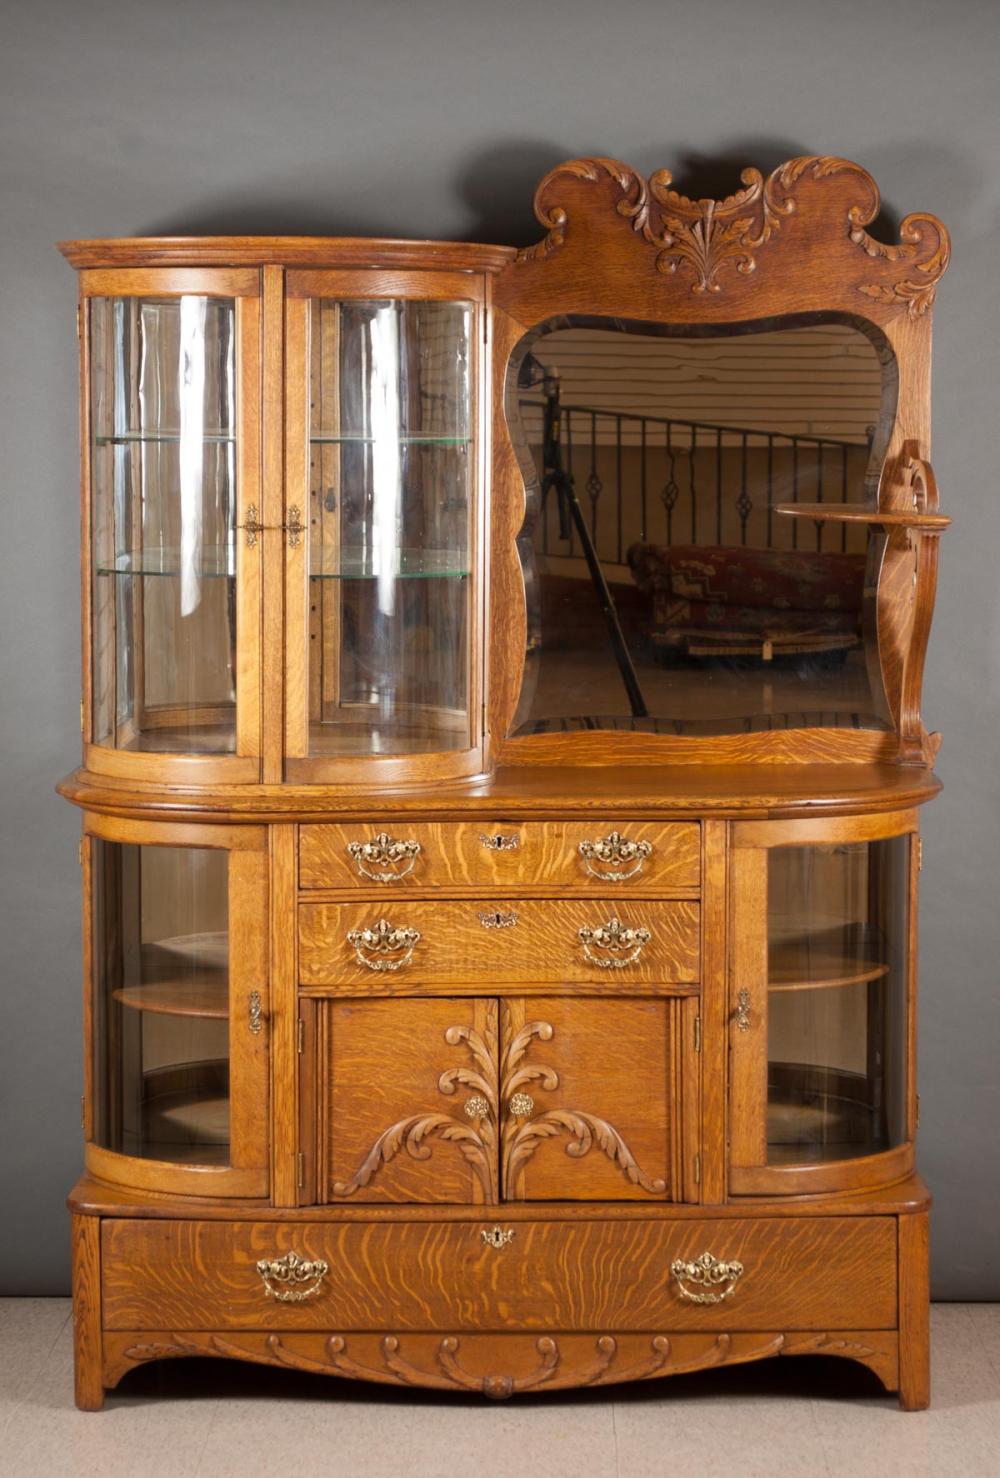 LATE VICTORIAN OAK AND CURVED GLASS 31586c